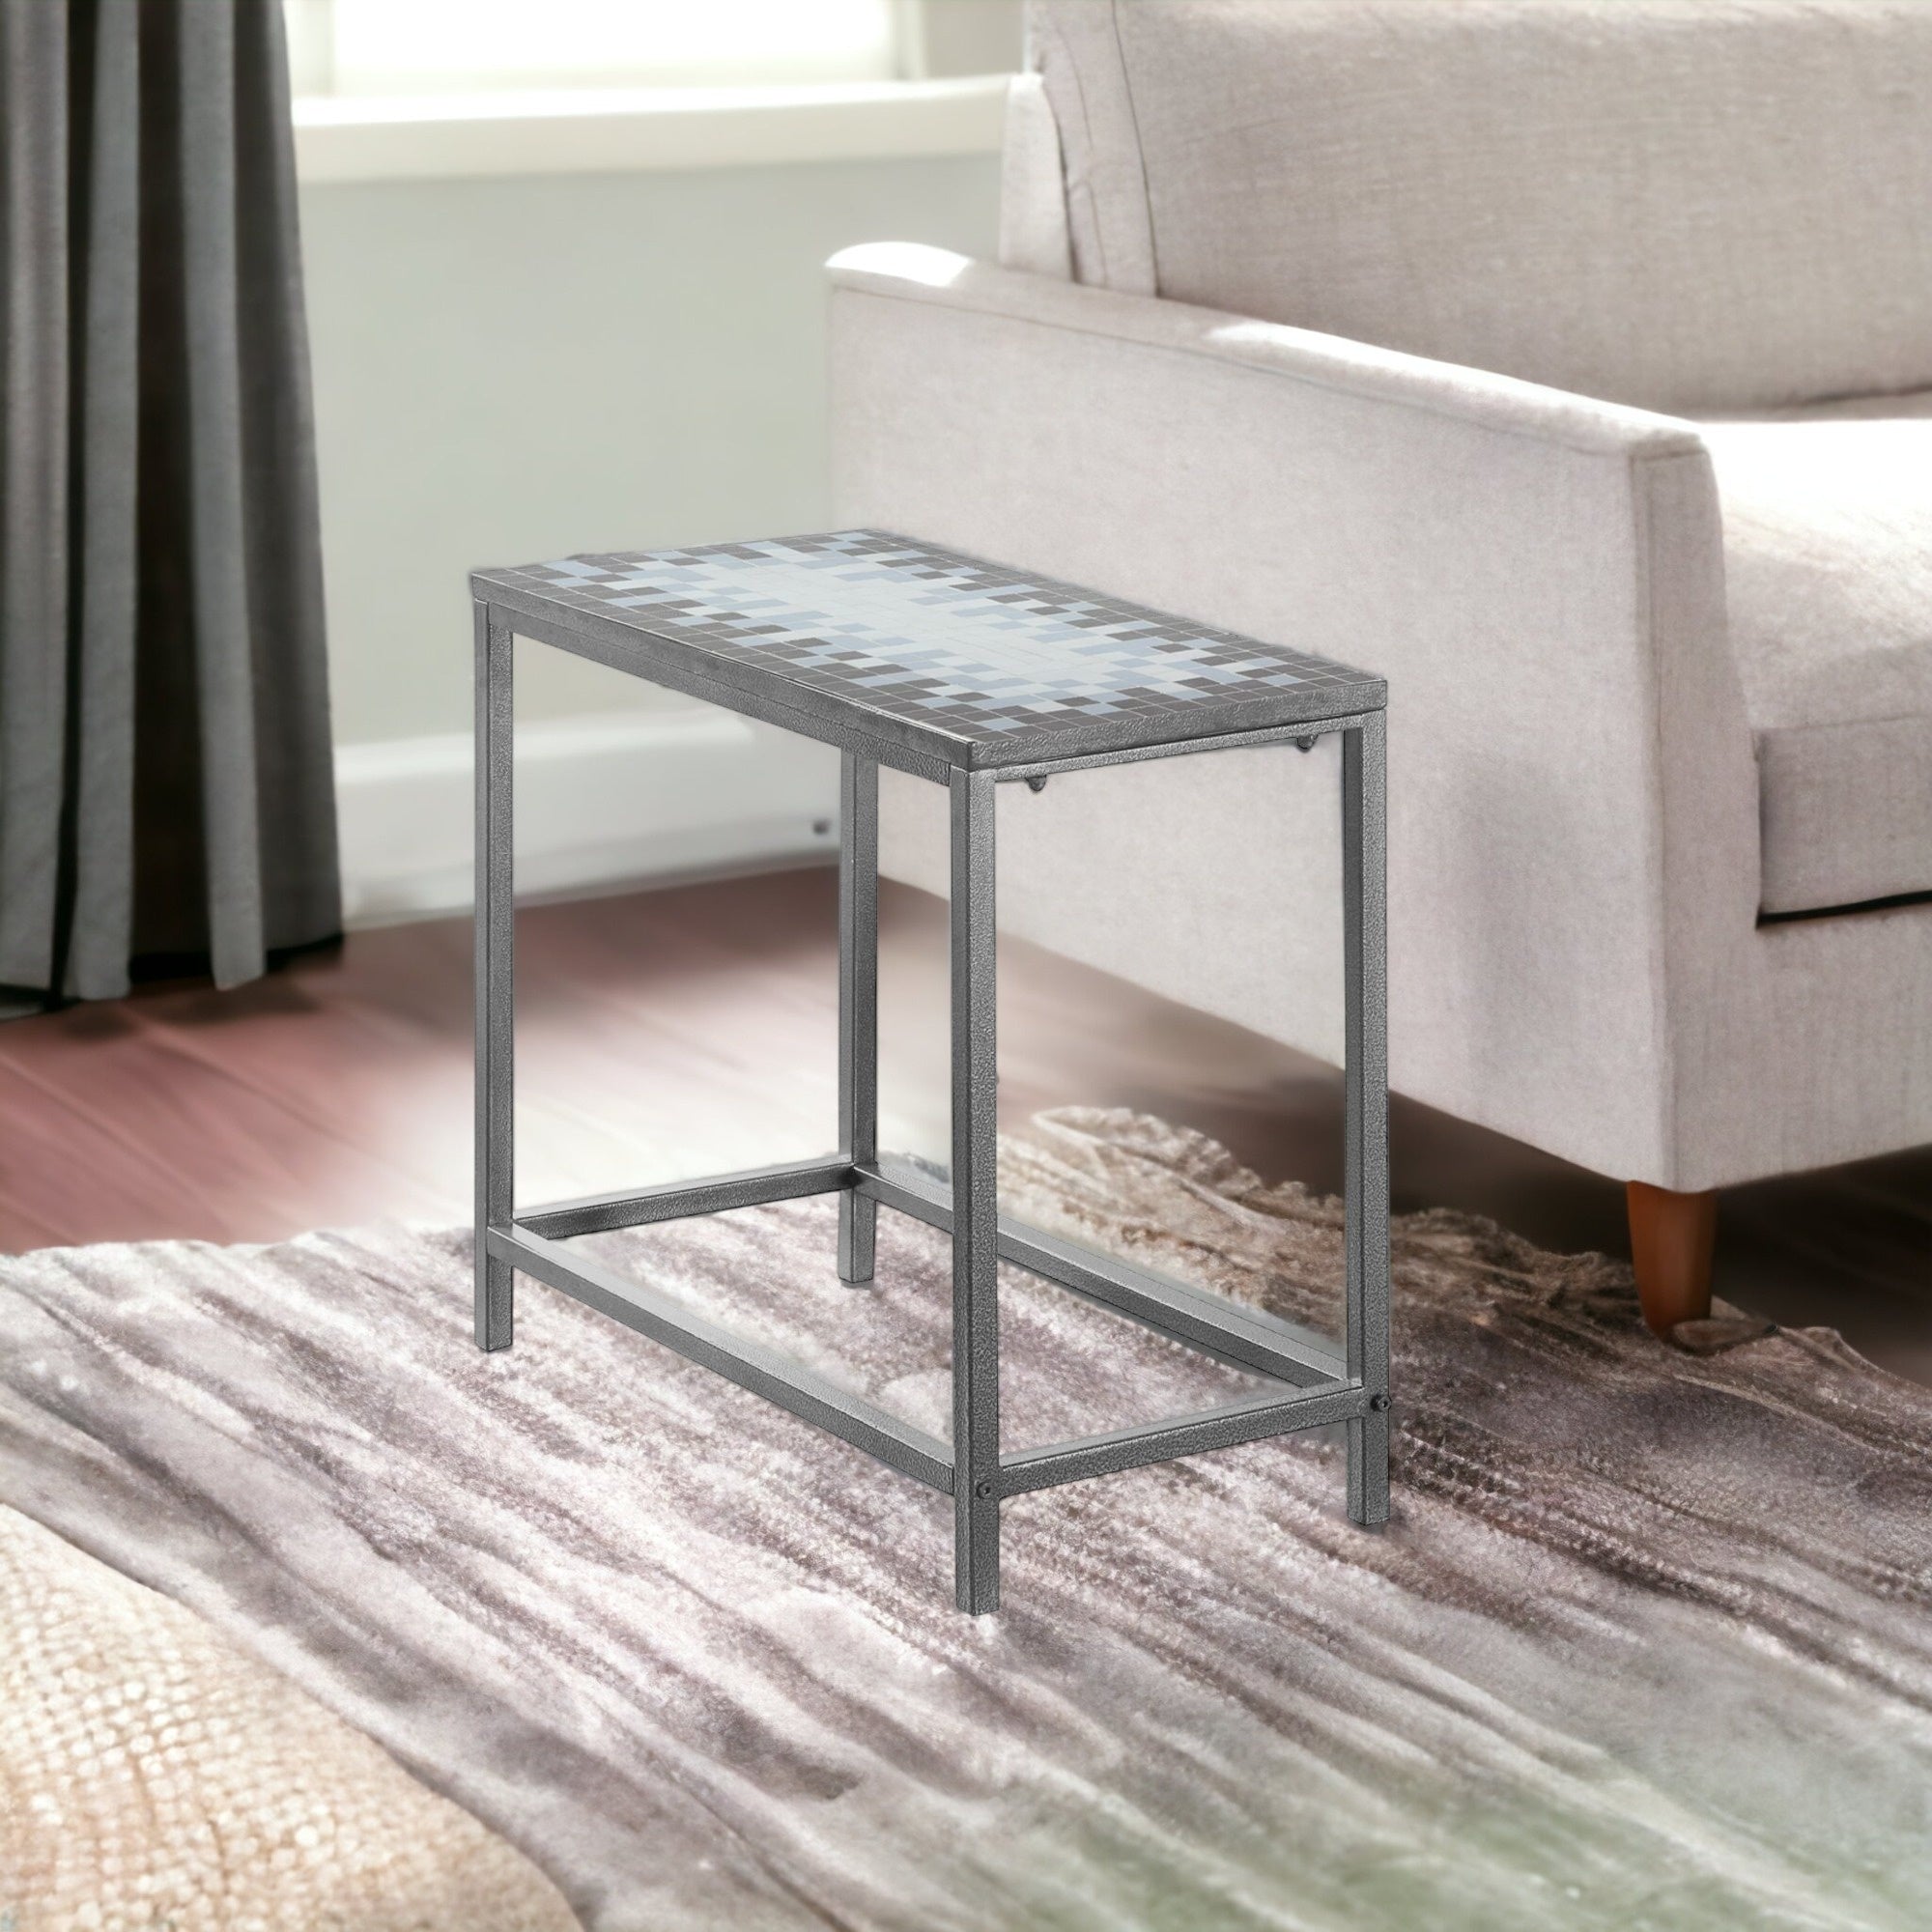 22" Gray And White Tile End Table